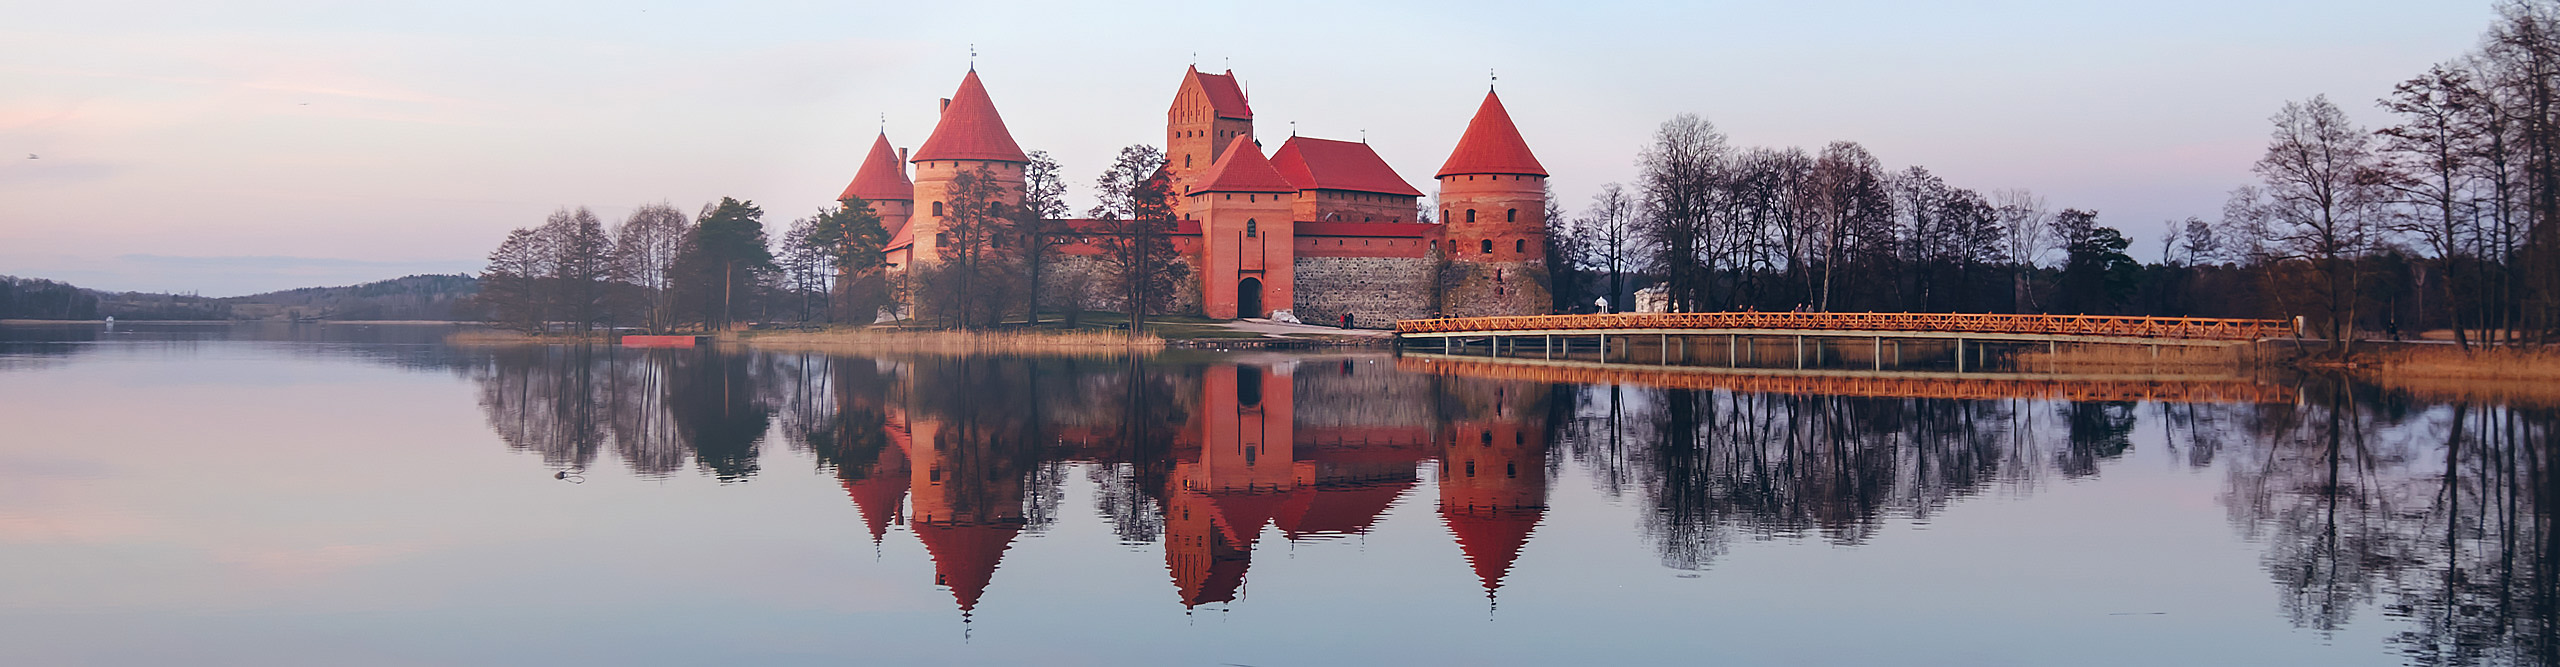 Trakai castle in early spring, reflected in the lake on a clear day at sunrise, Lithuania 